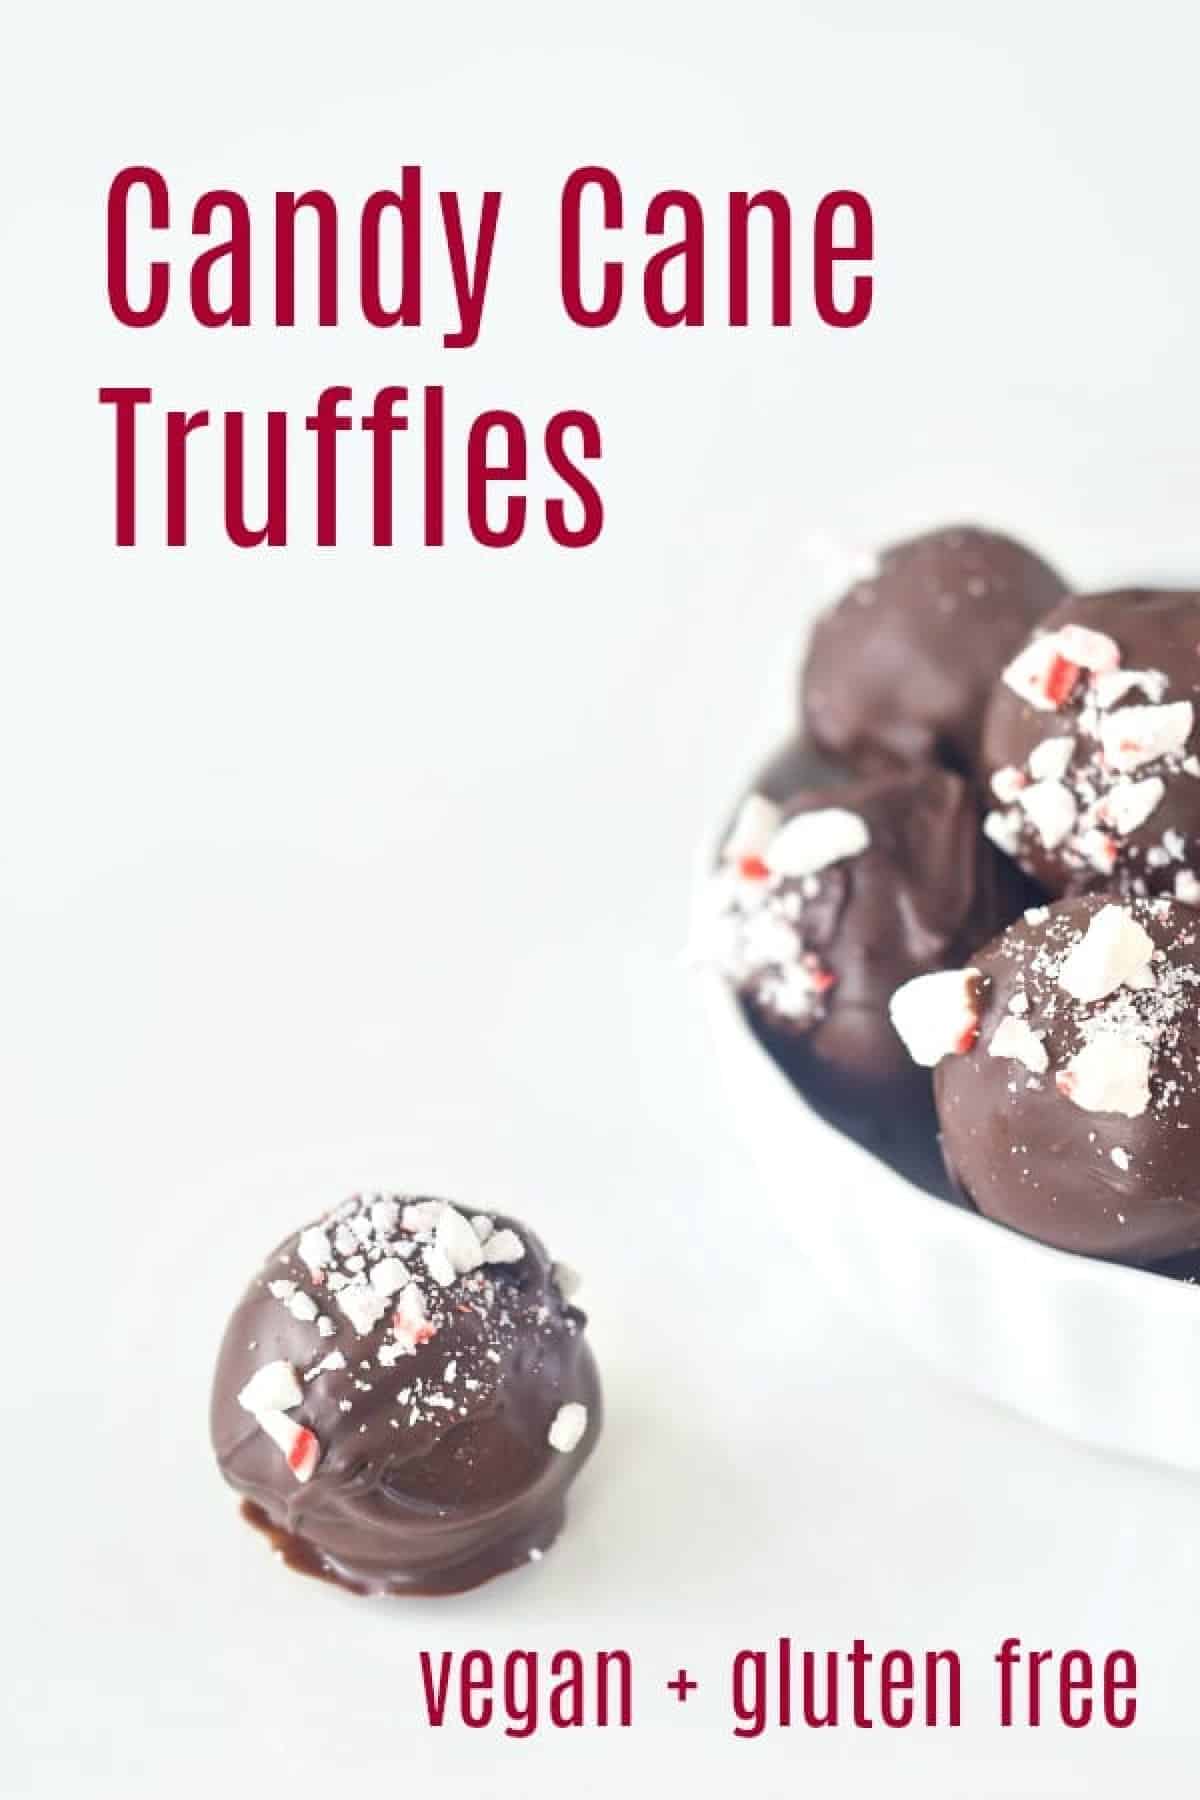 A small ramekin of chocolate coated truffles with candy cane pieces on top sits on a white tabletop. One single truffle sits outside the bowl.